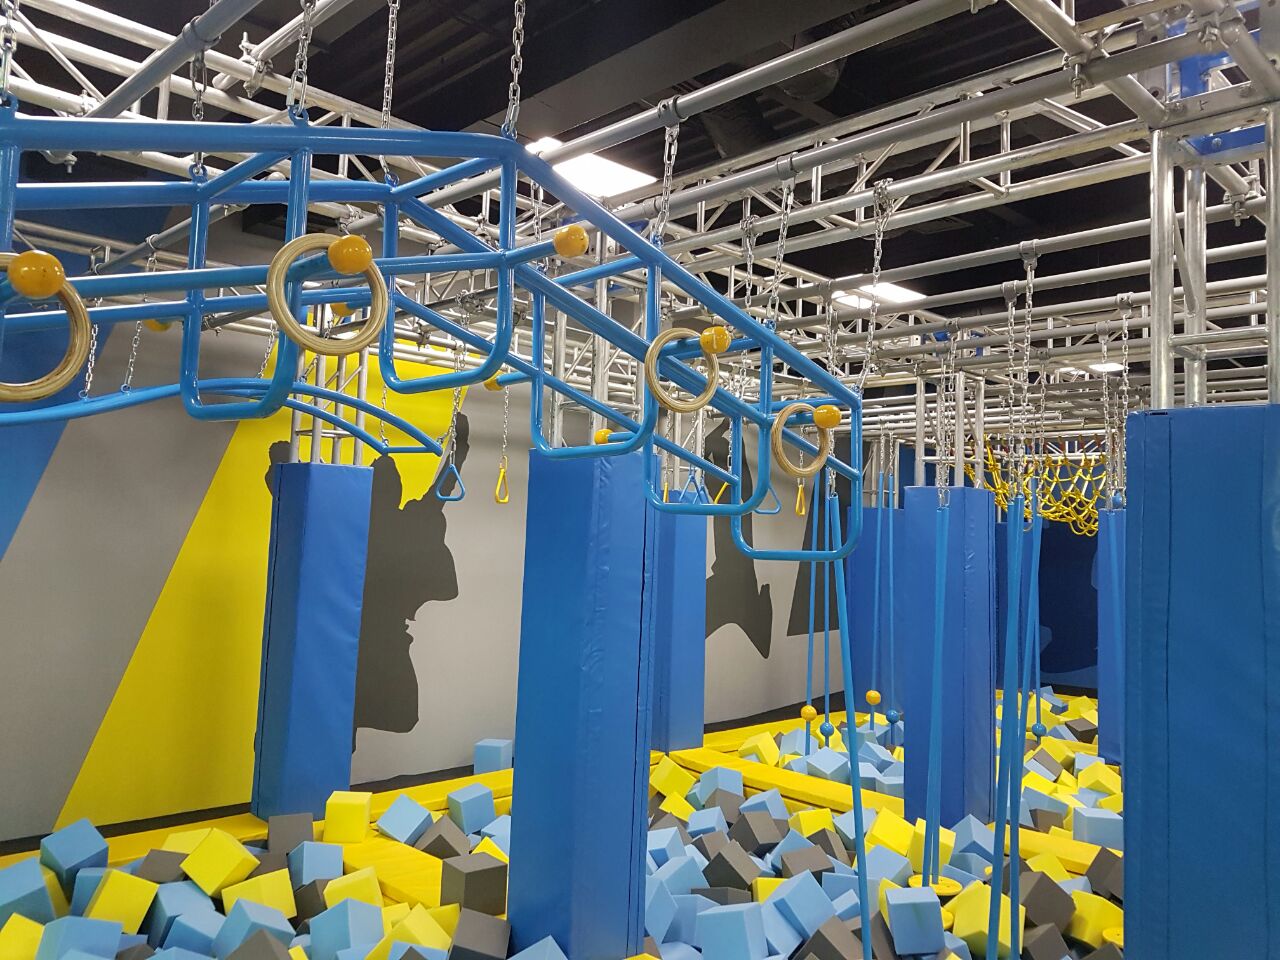 Why do you need indoor playground equipment?